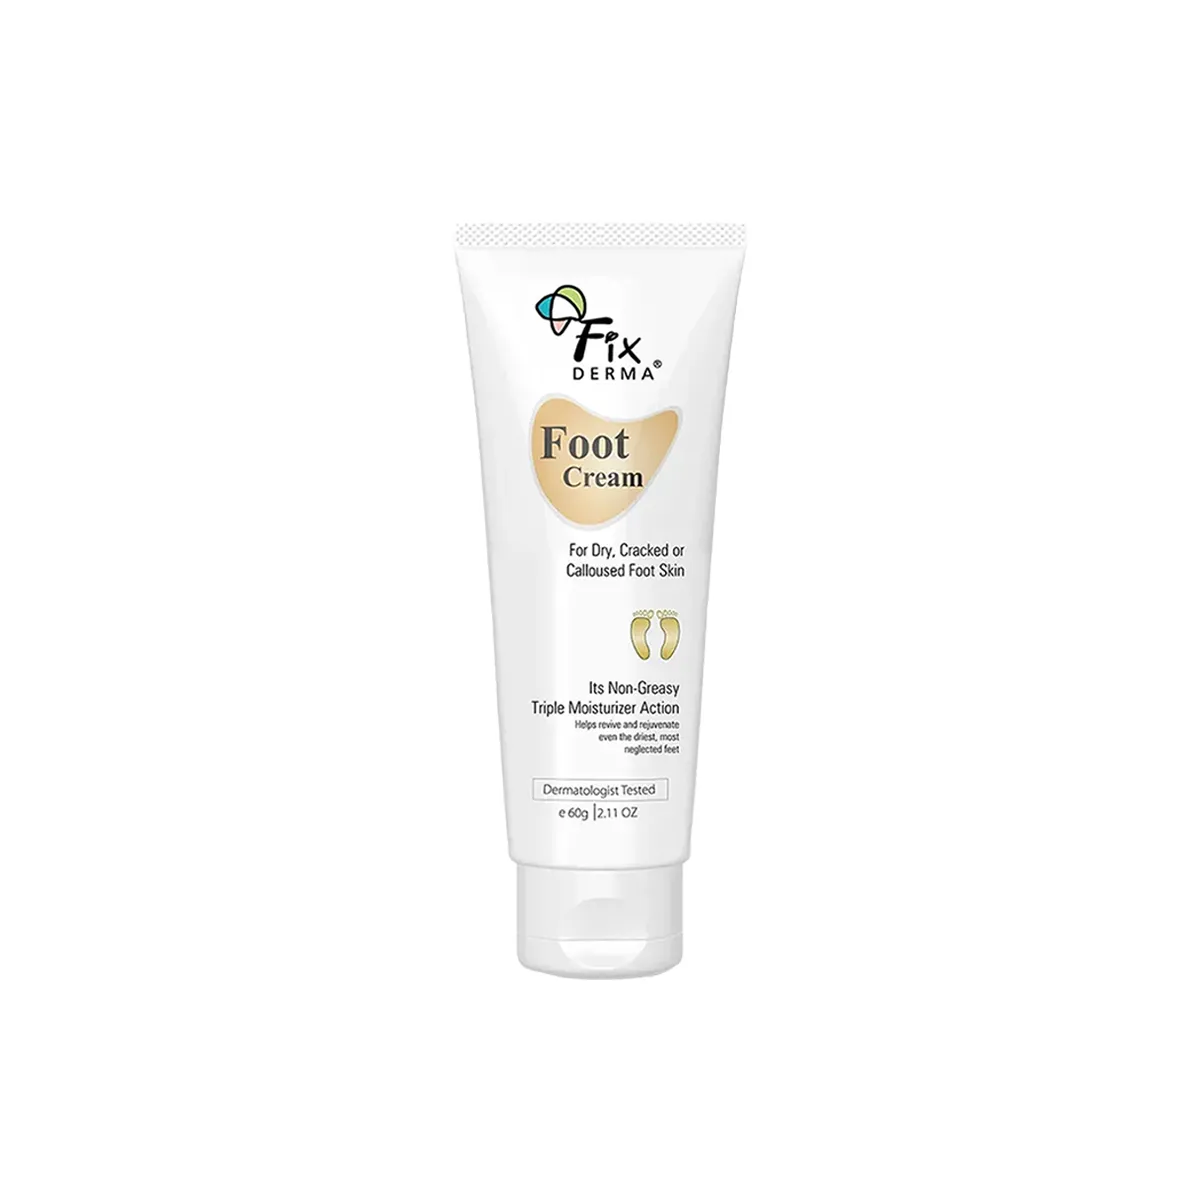 First product image of Fixderma Foot Cream 60g